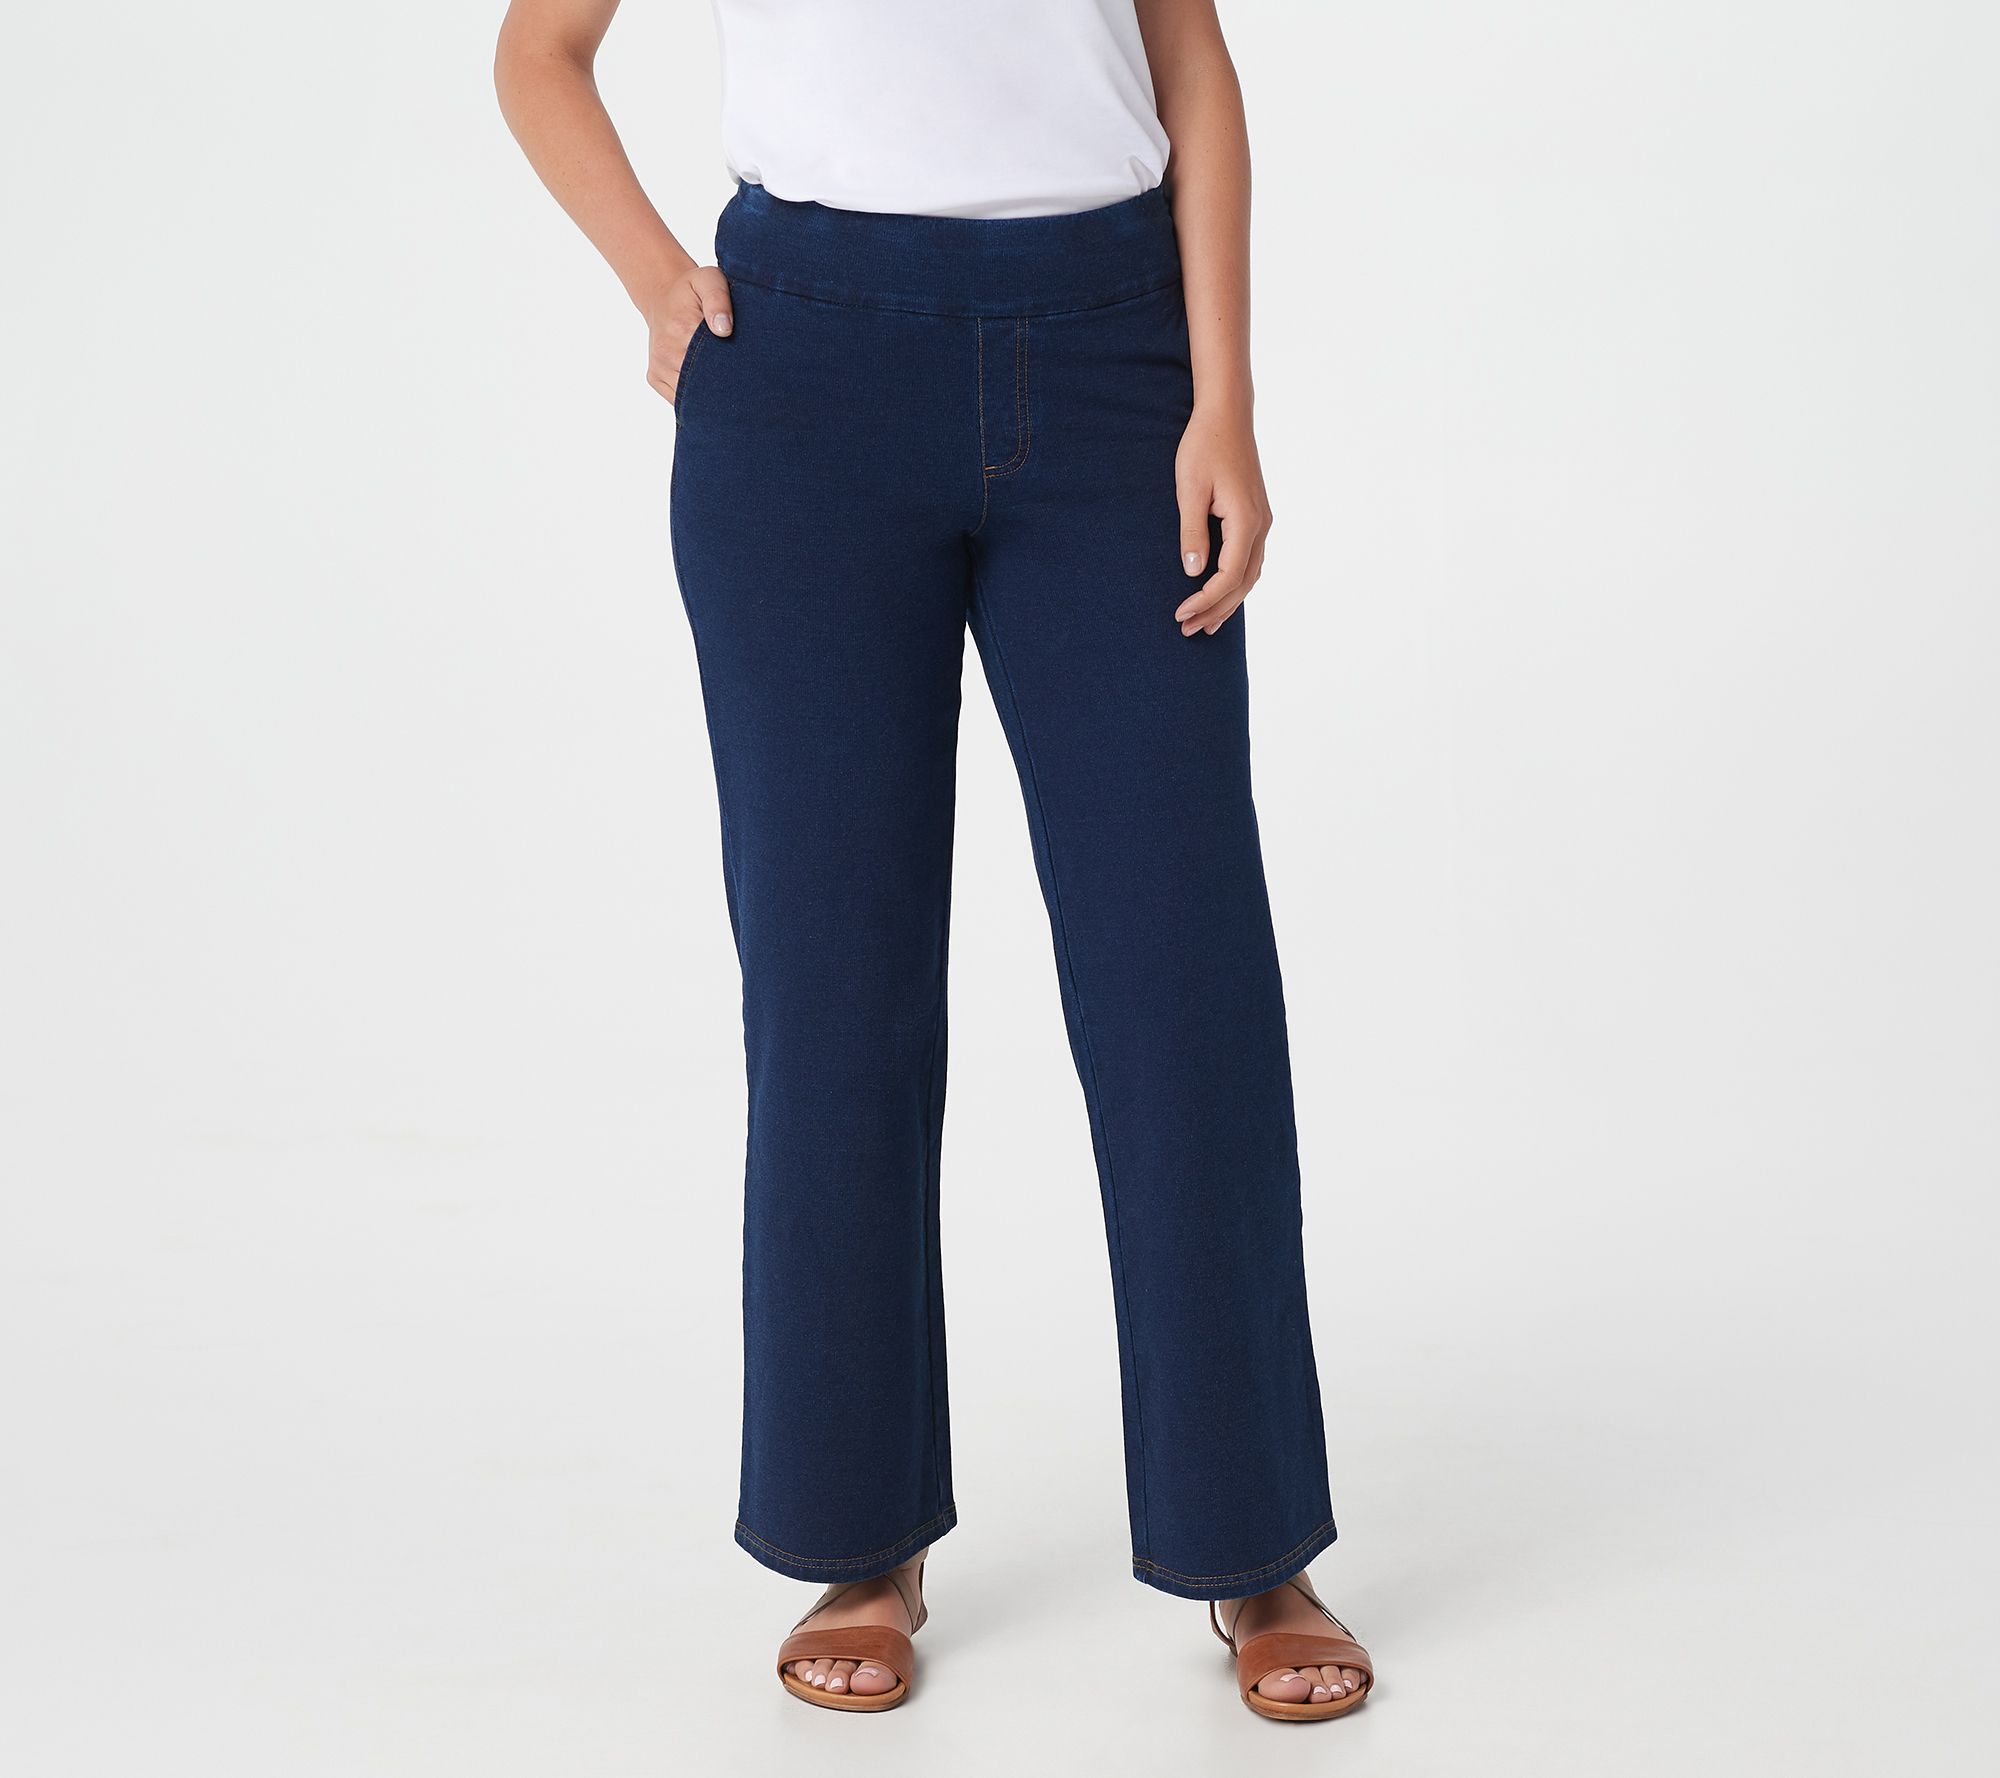 Denim & Co. Comfy Knit Wide-Leg Pant with Smooth Waist 